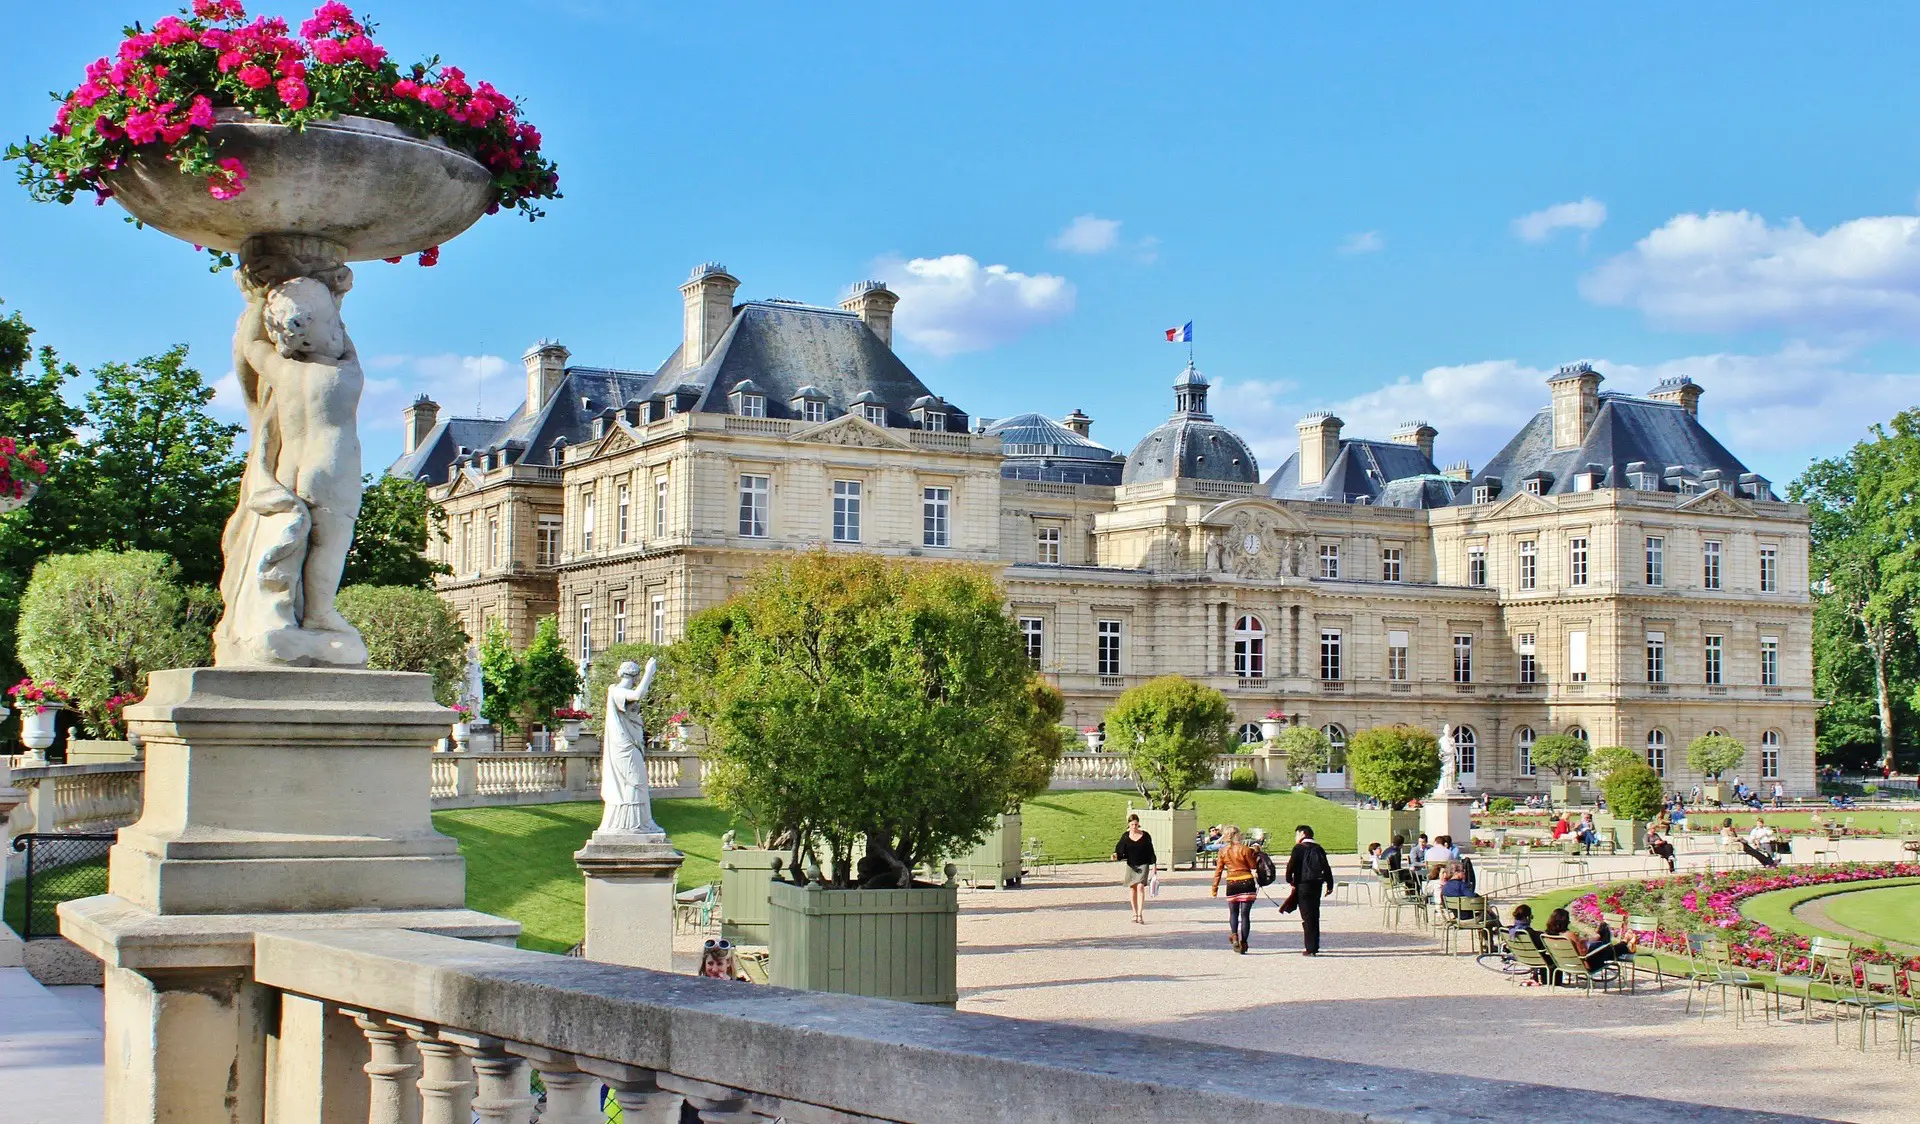 The Gardens of Luxembourg in Paris